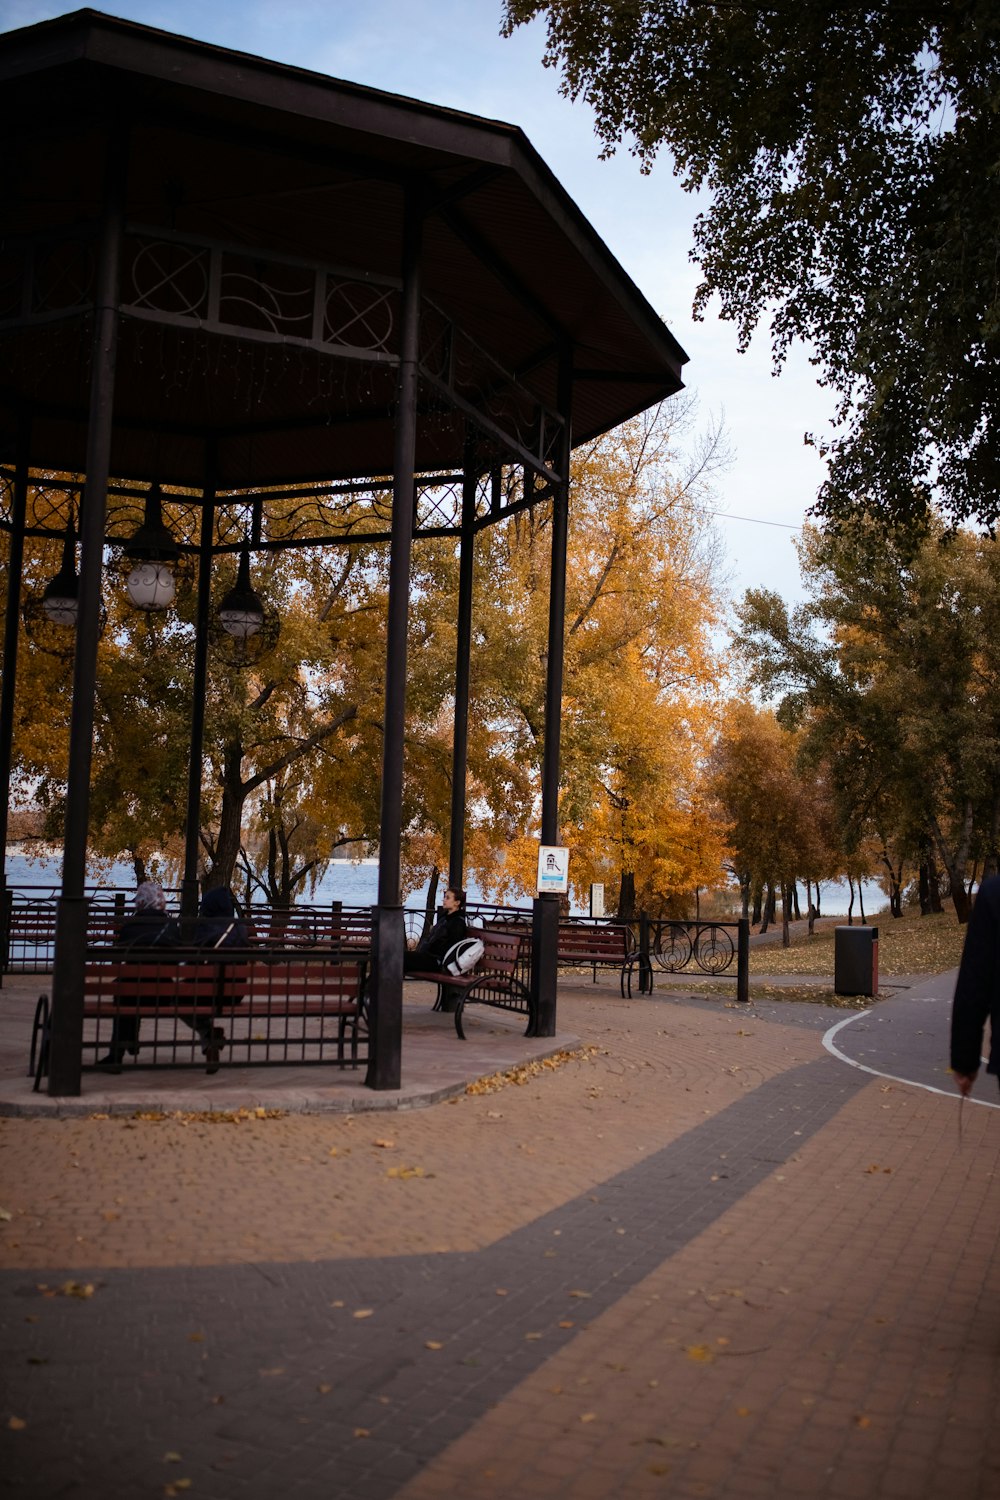 a gazebo in a park with people walking around